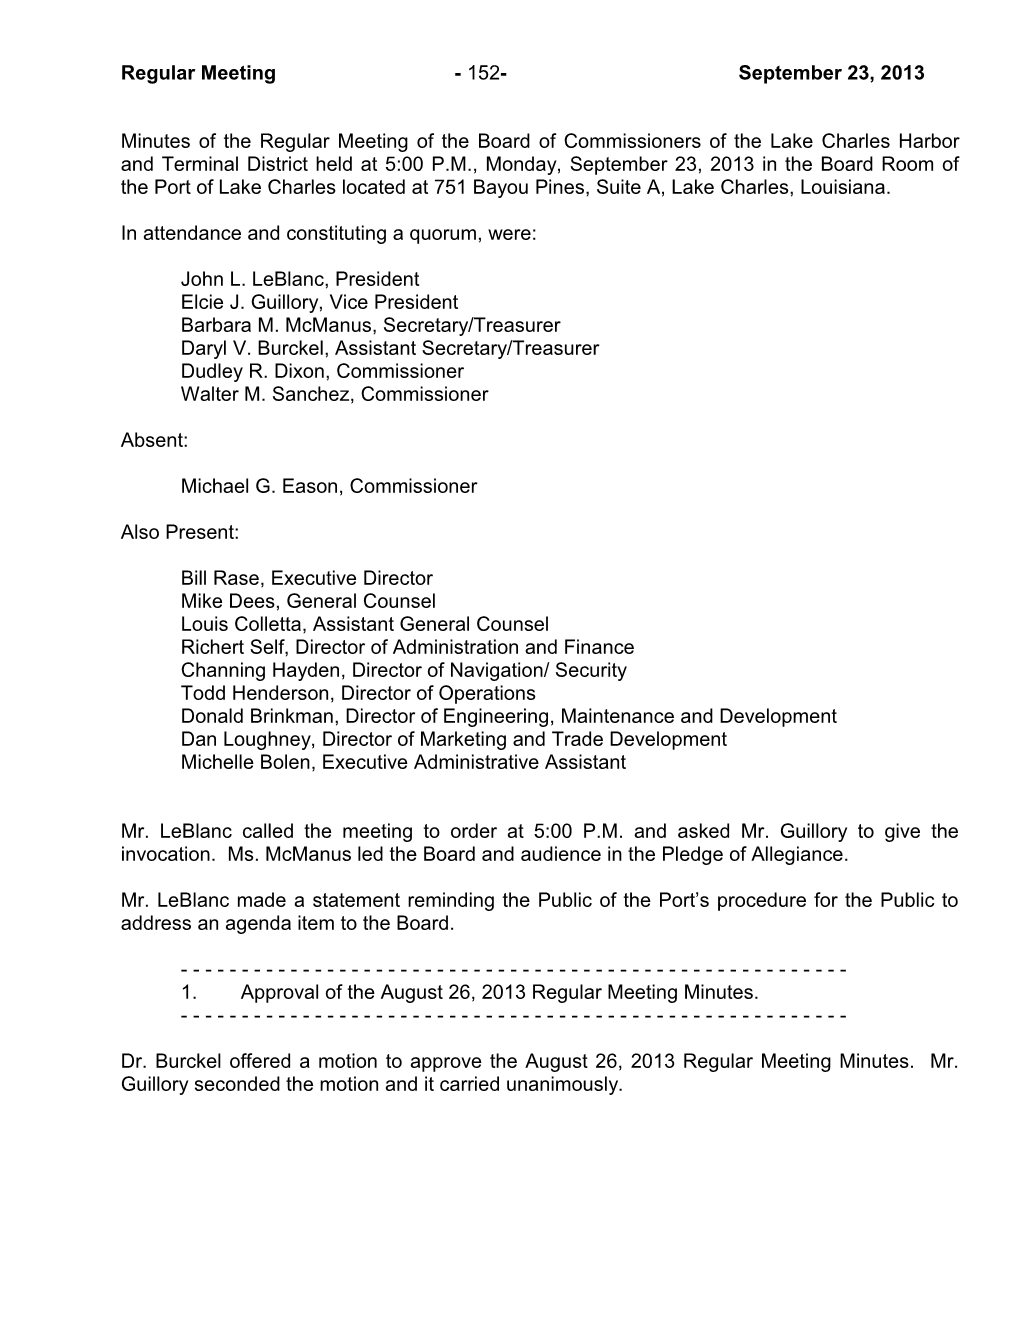 Minutes of the Regular Meeting of the Board of Commissioners of the Lake Charles Harbor s1